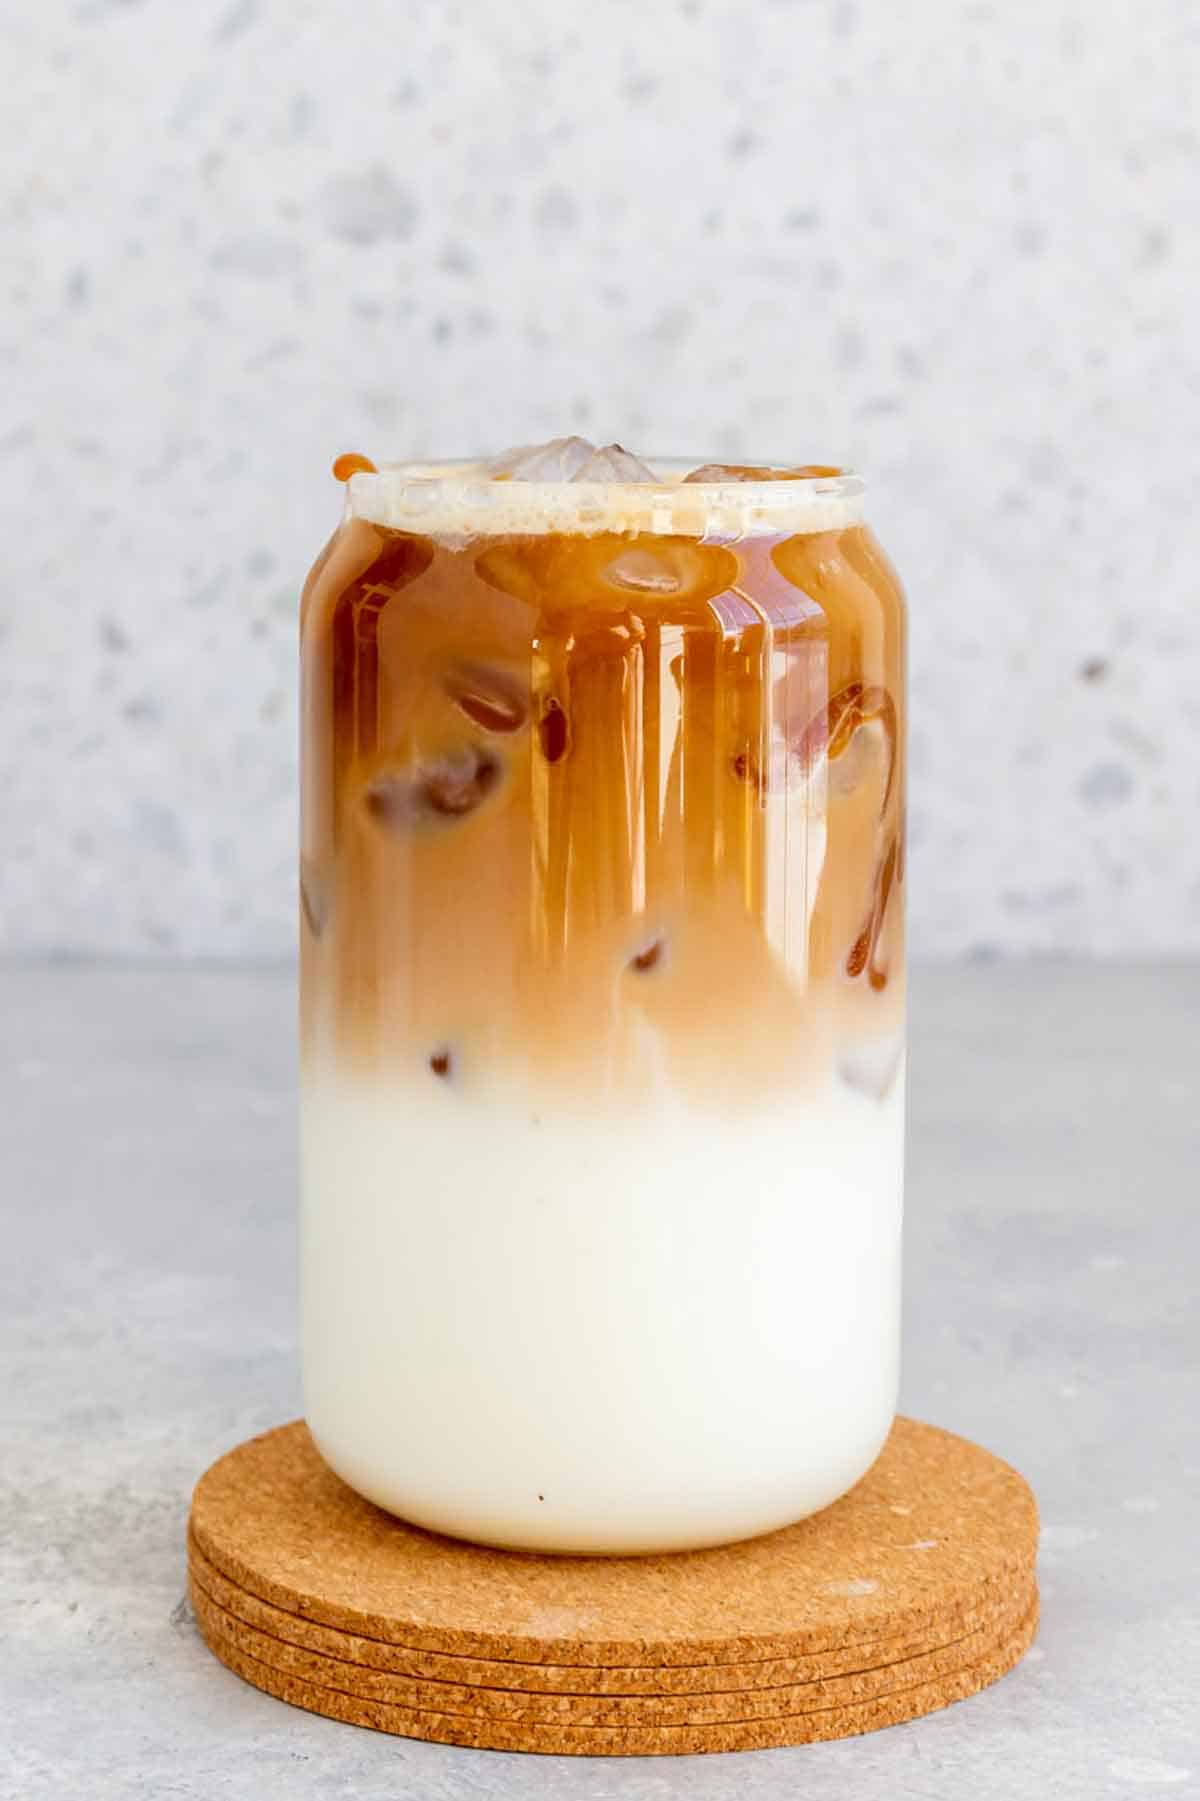 A caramel macchiato in a glass, showing the distinctive layers.